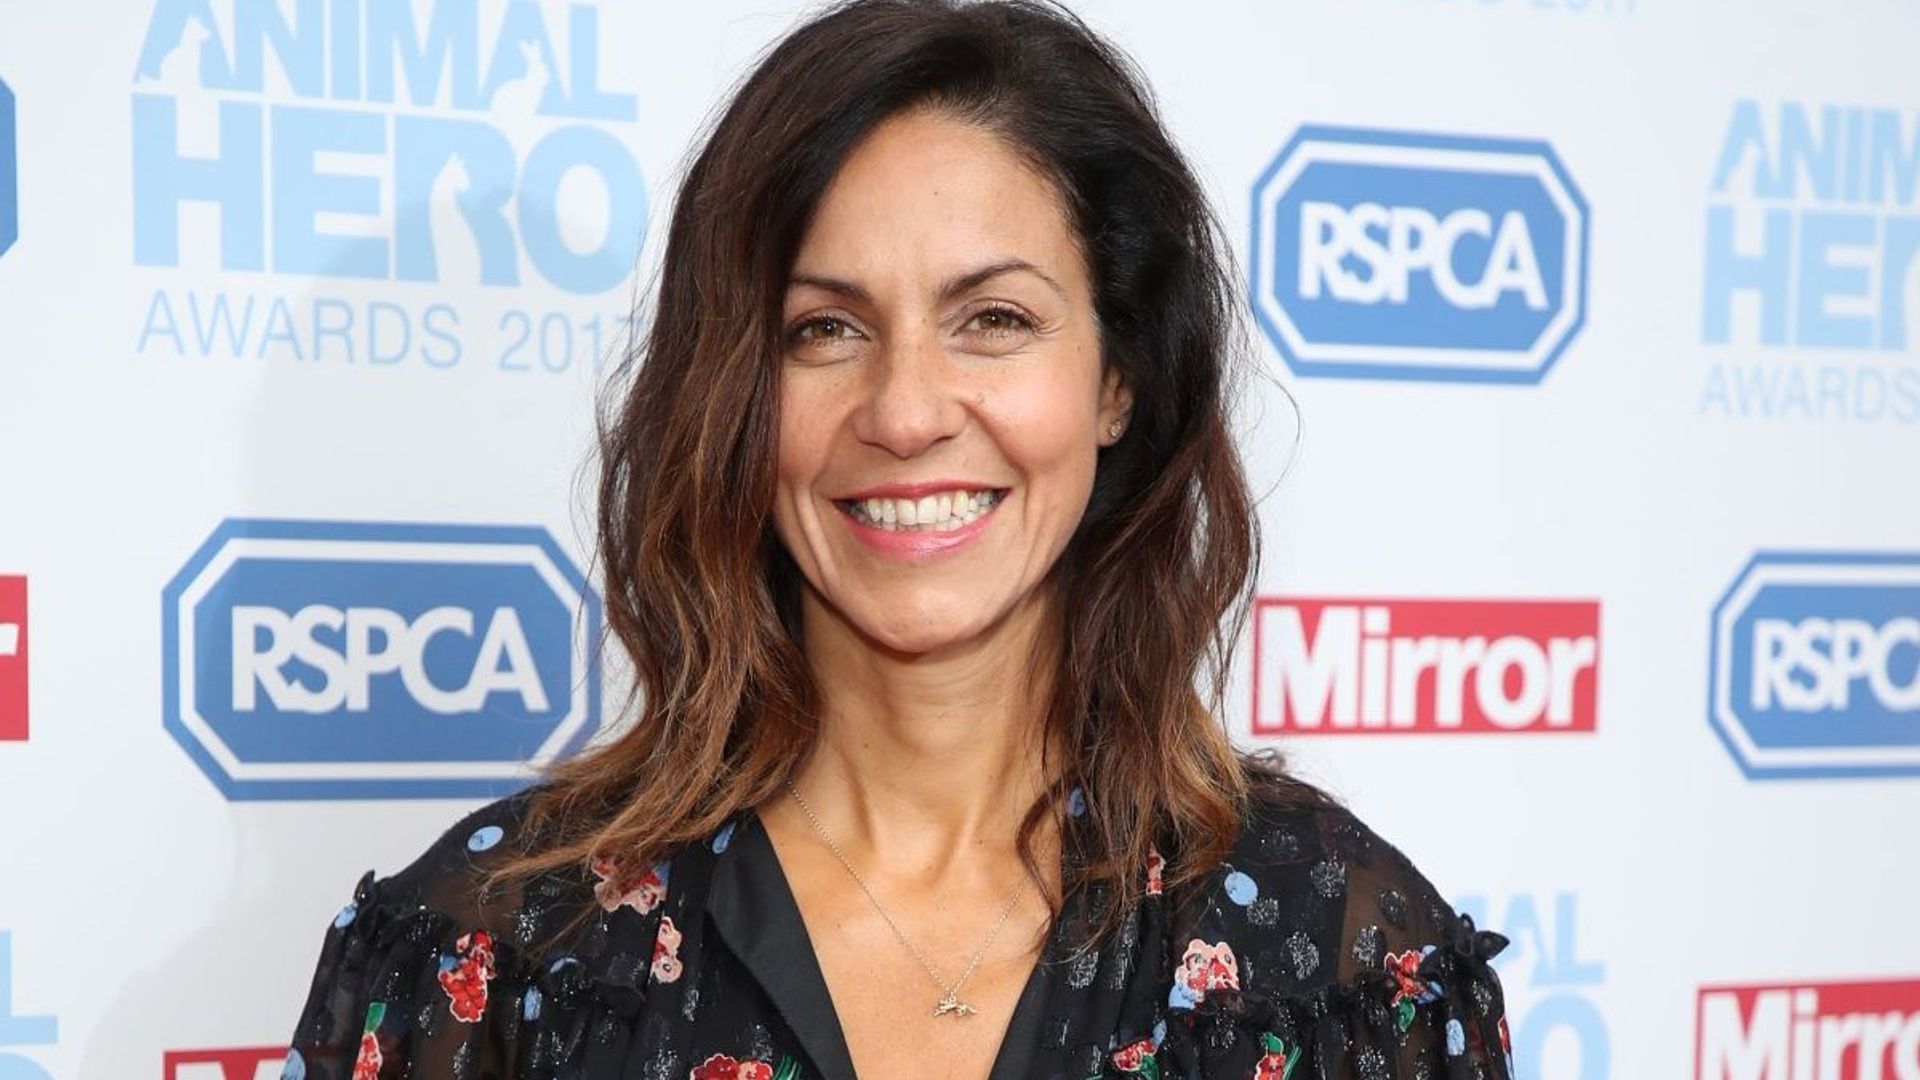 Countryfiles Julia Bradbury Wows In Sports Bra And Leggings As She Opens Up About Weight Hello 7732